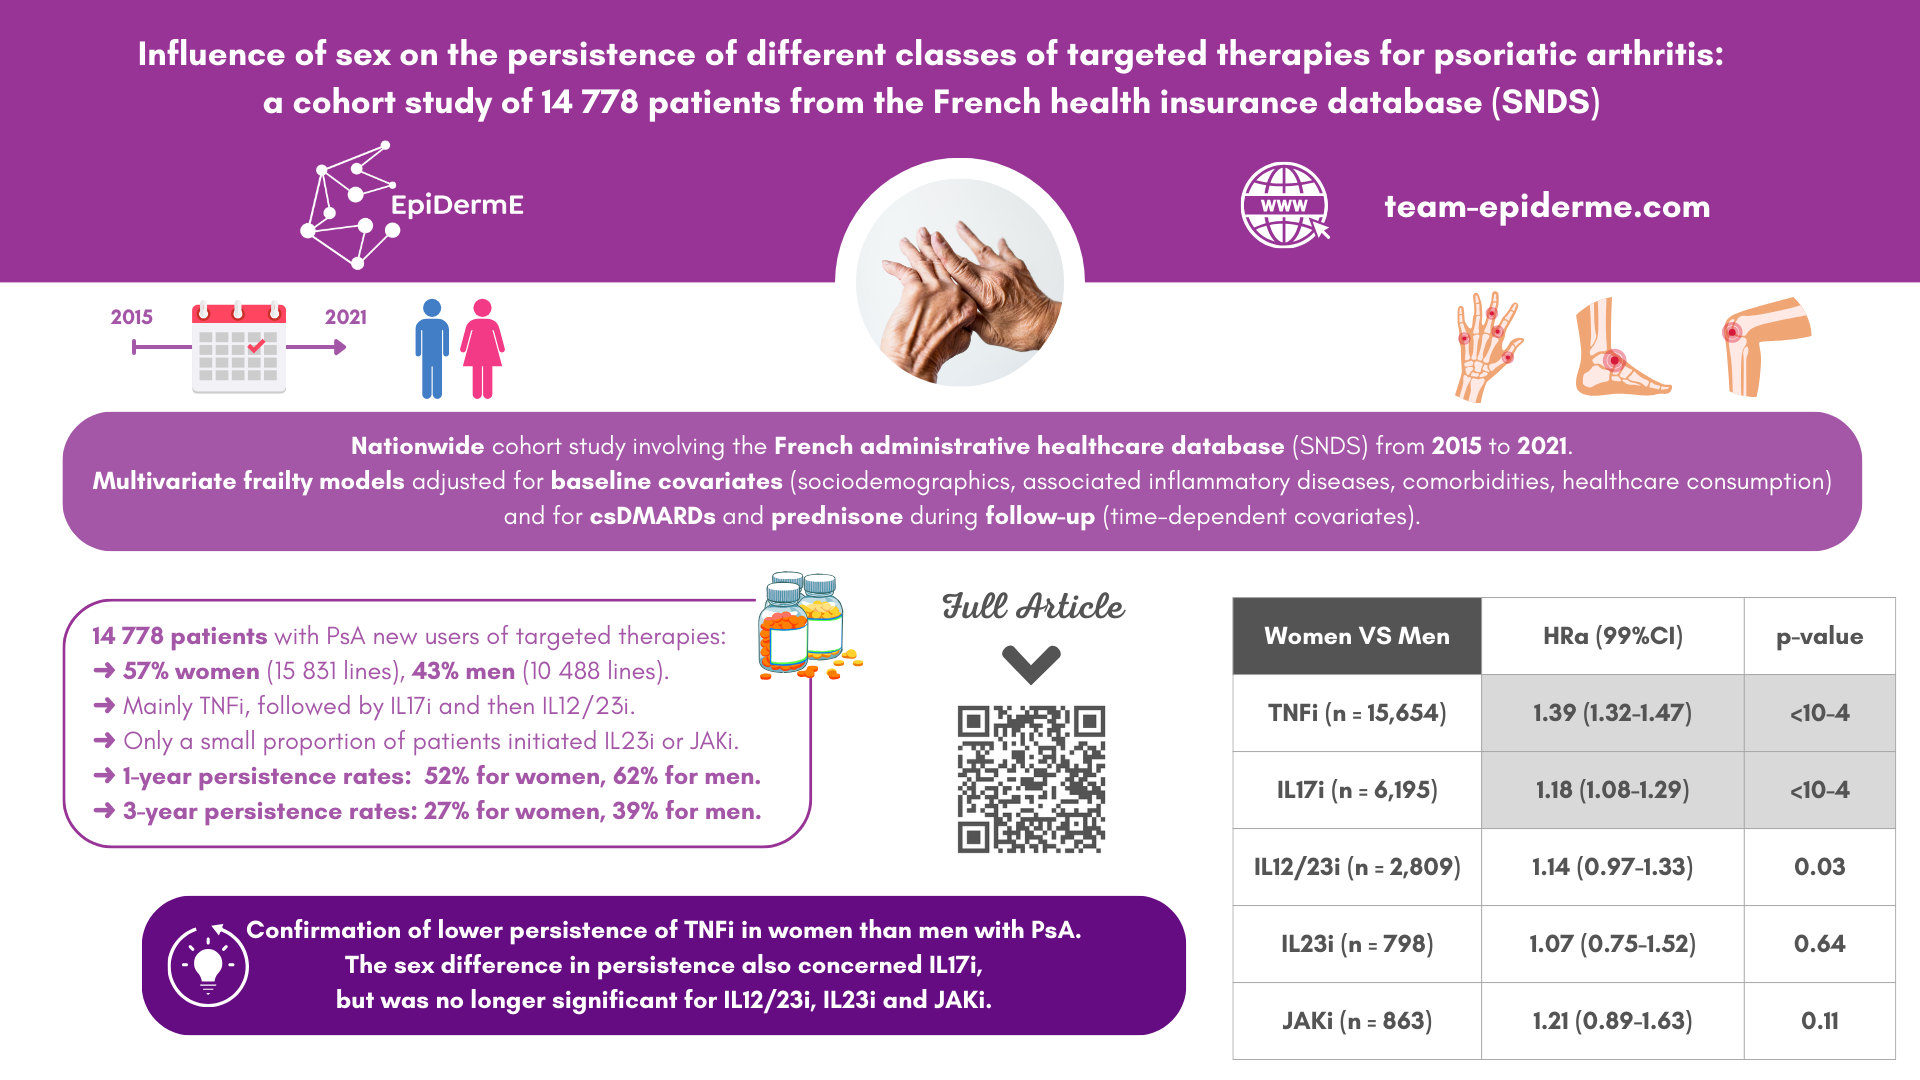 Influence of sex on the persistence of different classes of targeted therapies for psoriatic arthritis a cohort study of 14 778 patients from the French health insurance database (SNDS)